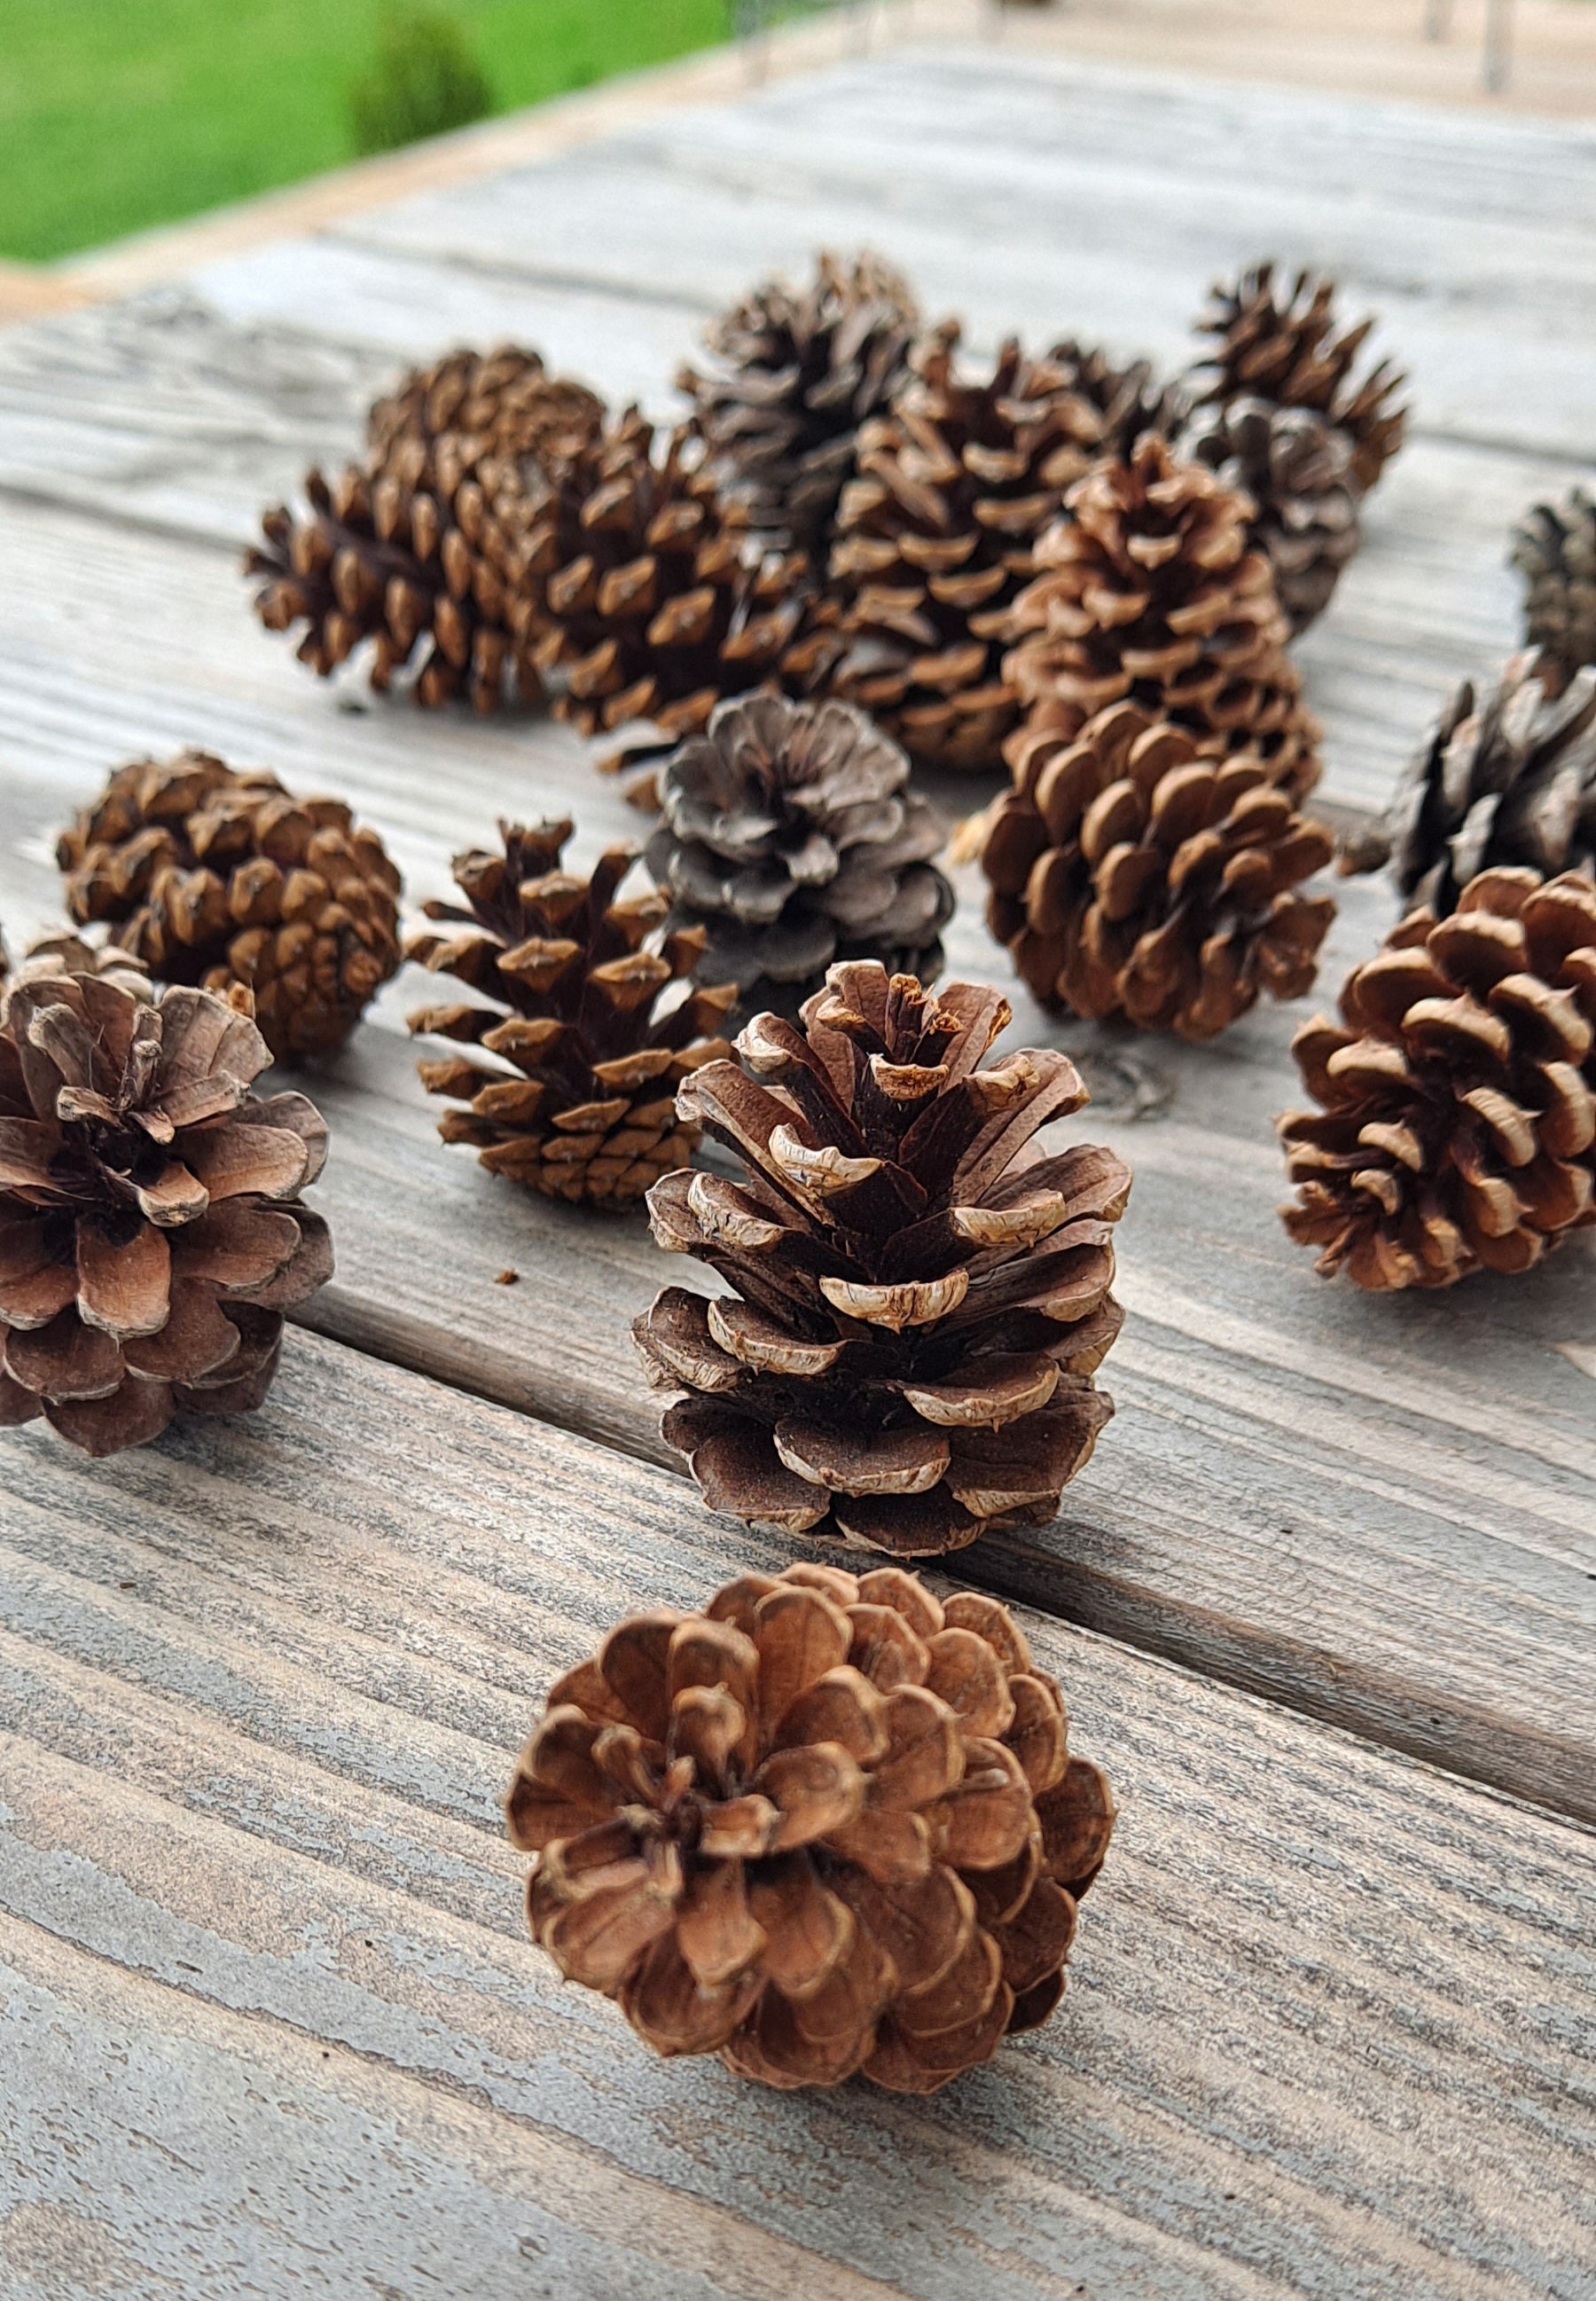 JOHOUSE 3.5-5Inch Natural Pine Cones, Big Pinecones, Christmas Natural  Pinecone Ornaments Big Spruce Pine Cones for Autumn and Winter Decor  Christmas